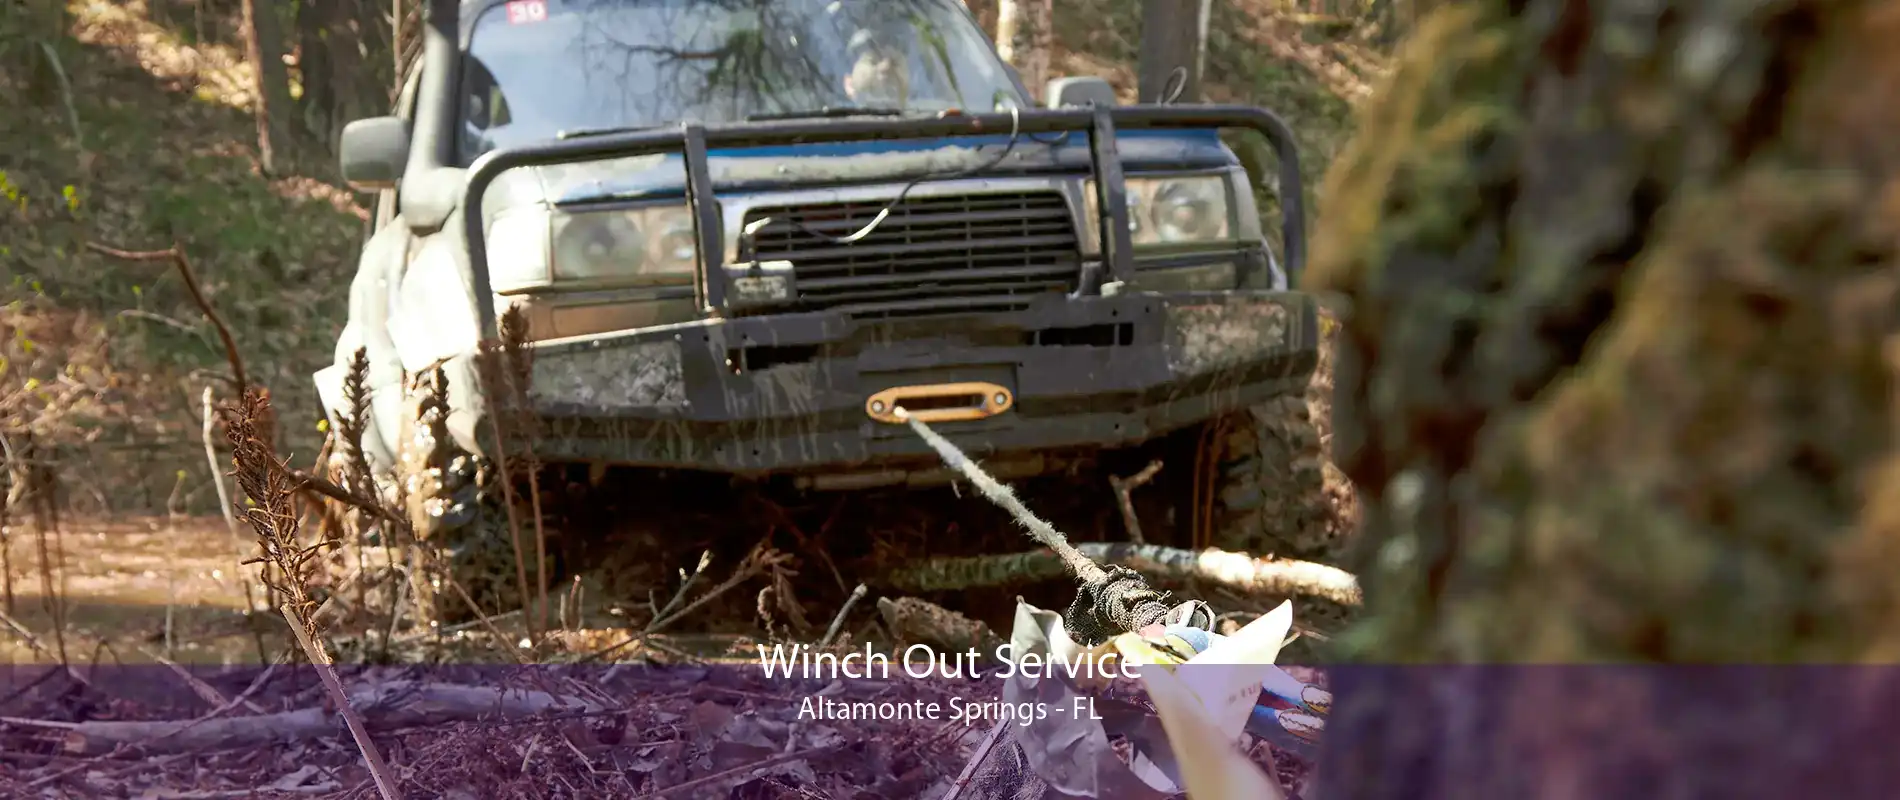 Winch Out Service Altamonte Springs - FL